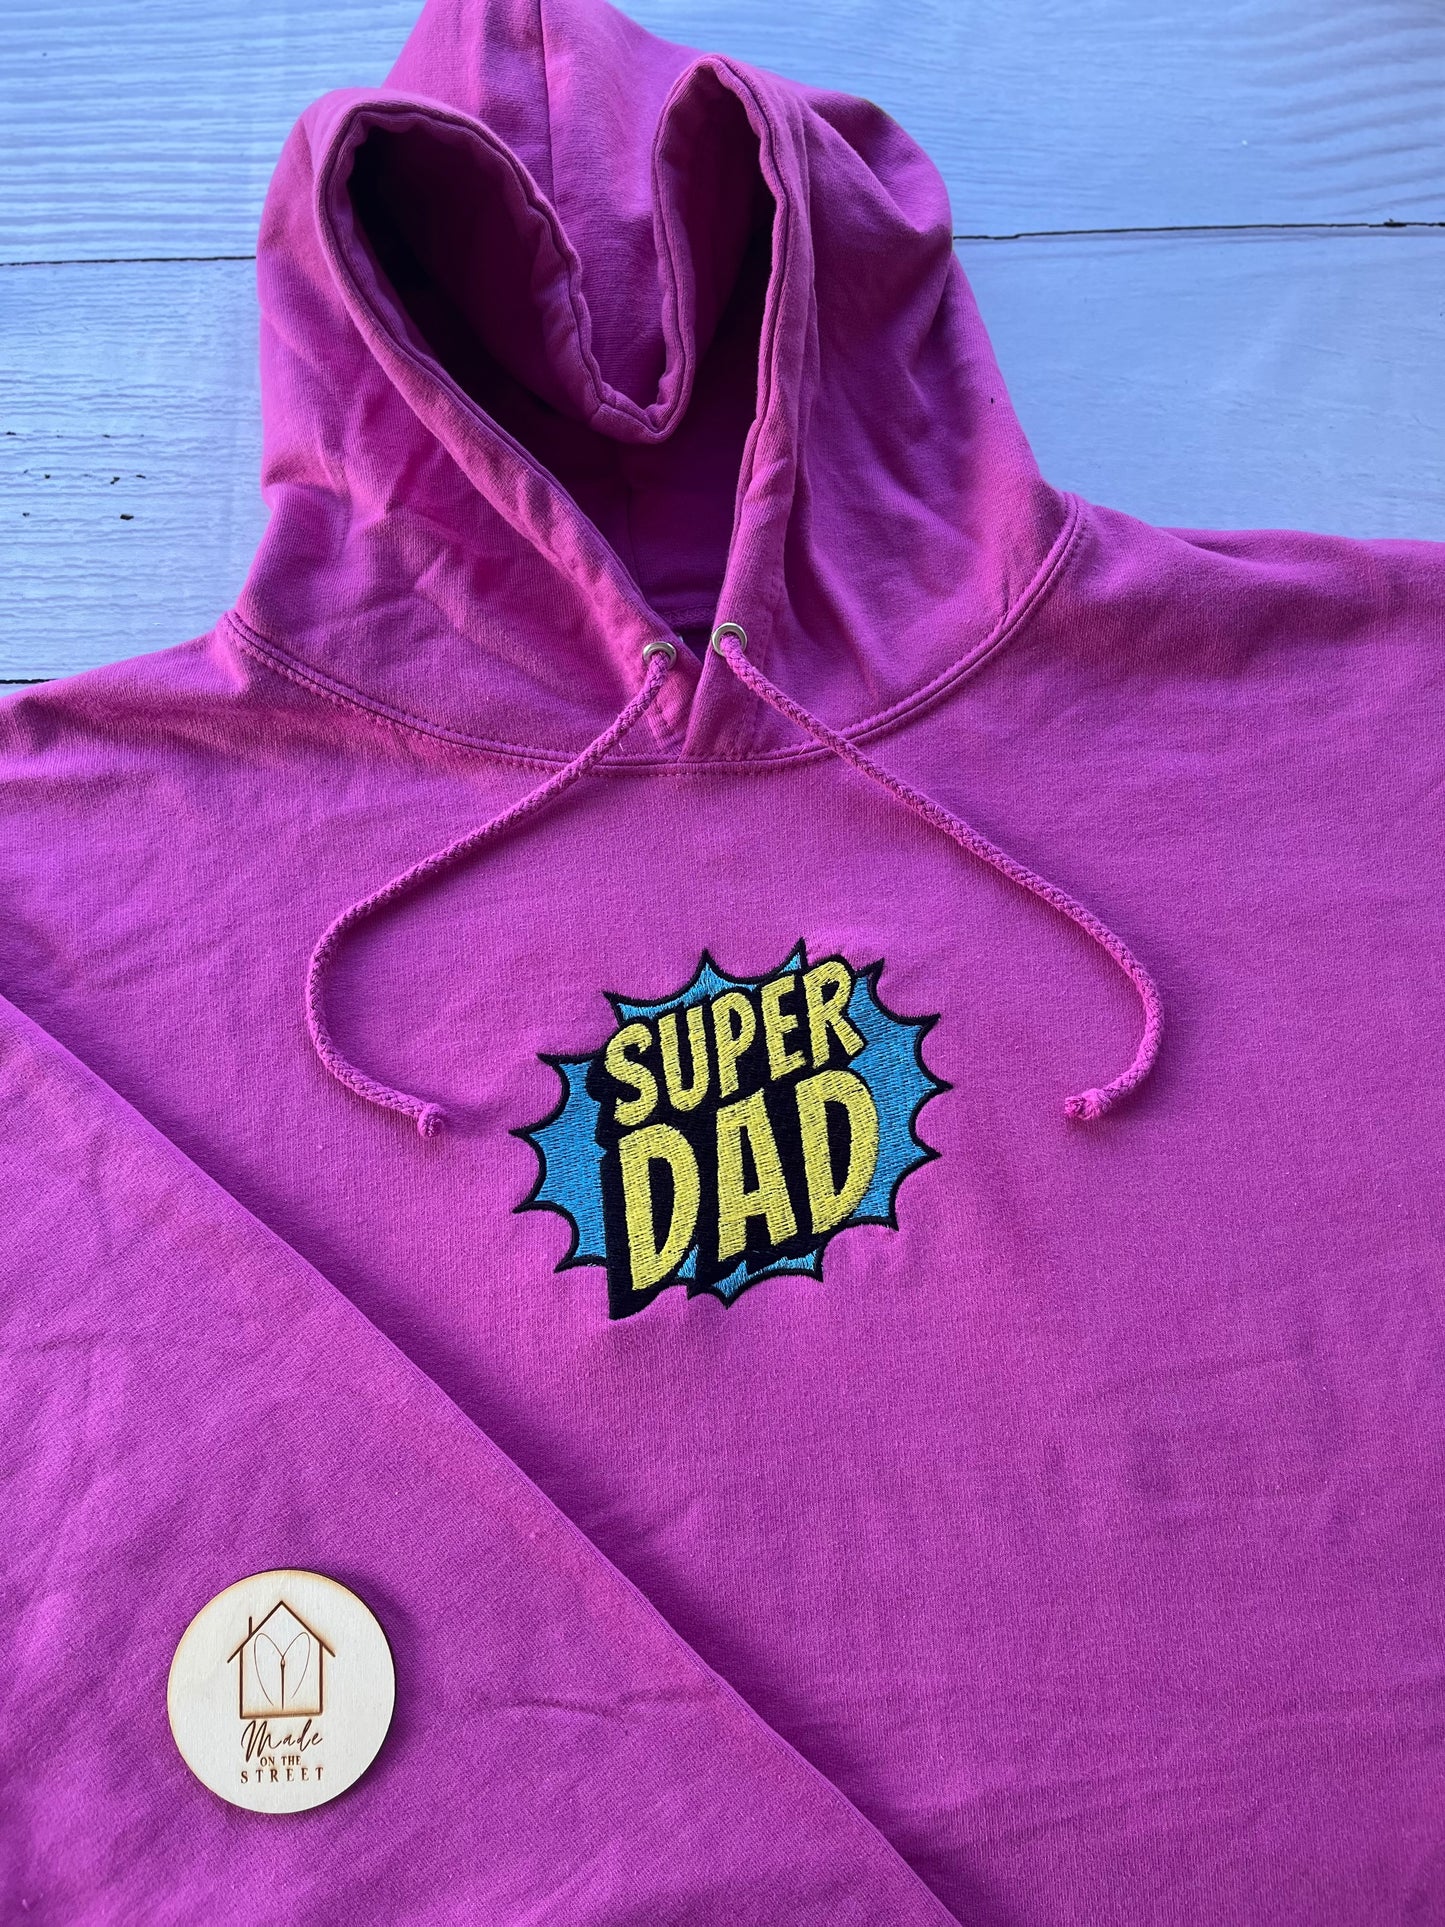 Fathers Day - Super Dad Hoody